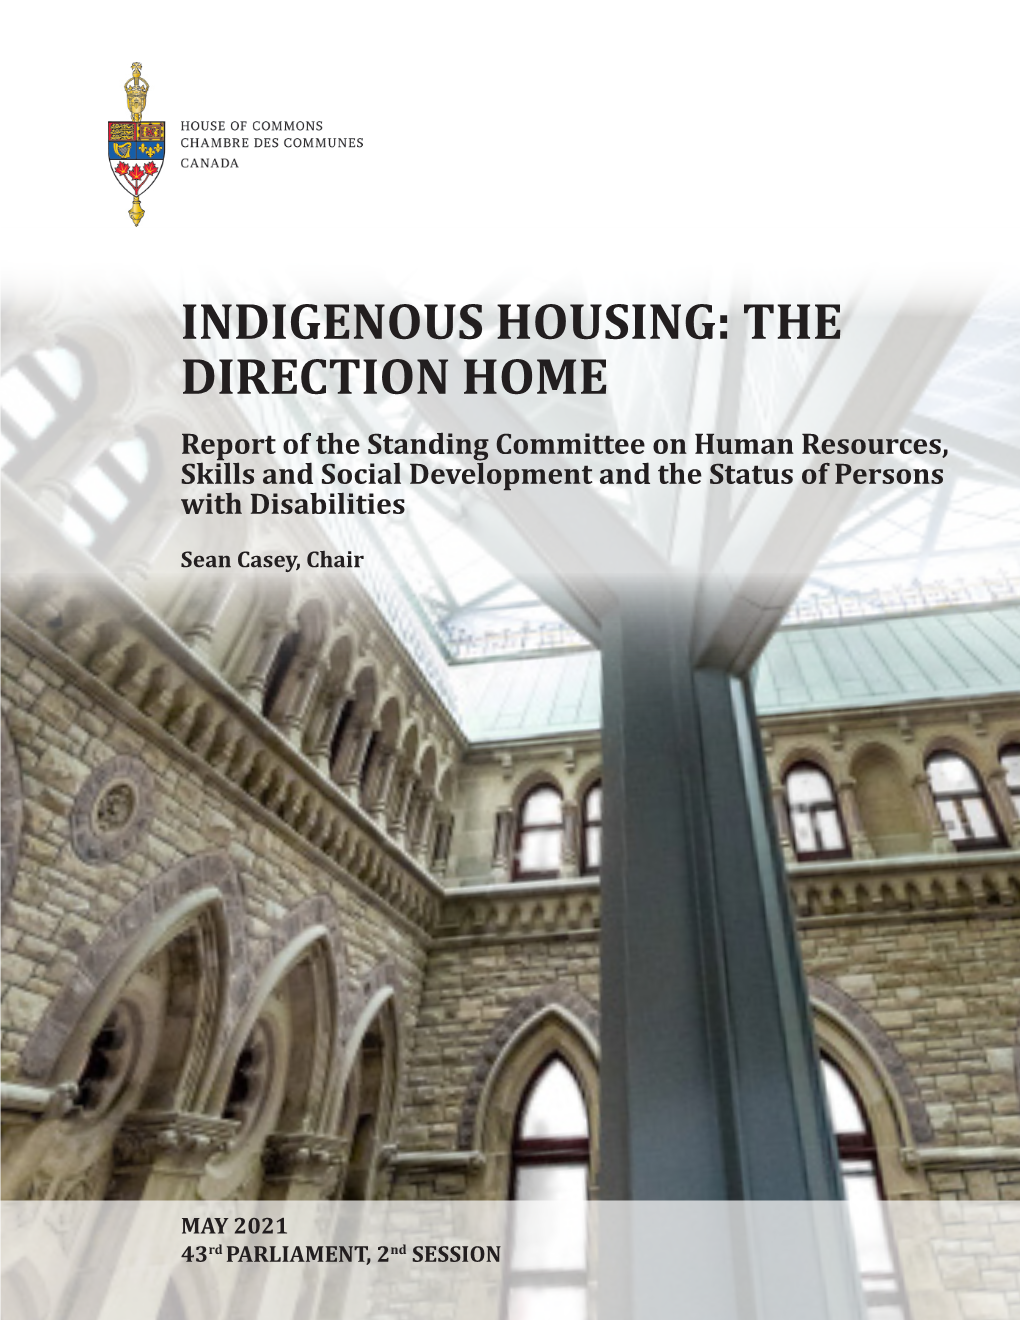 INDIGENOUS HOUSING: the DIRECTION HOME Report of the Standing Committee on Human Resources, Skills and Social Development and the Status of Persons with Disabilities